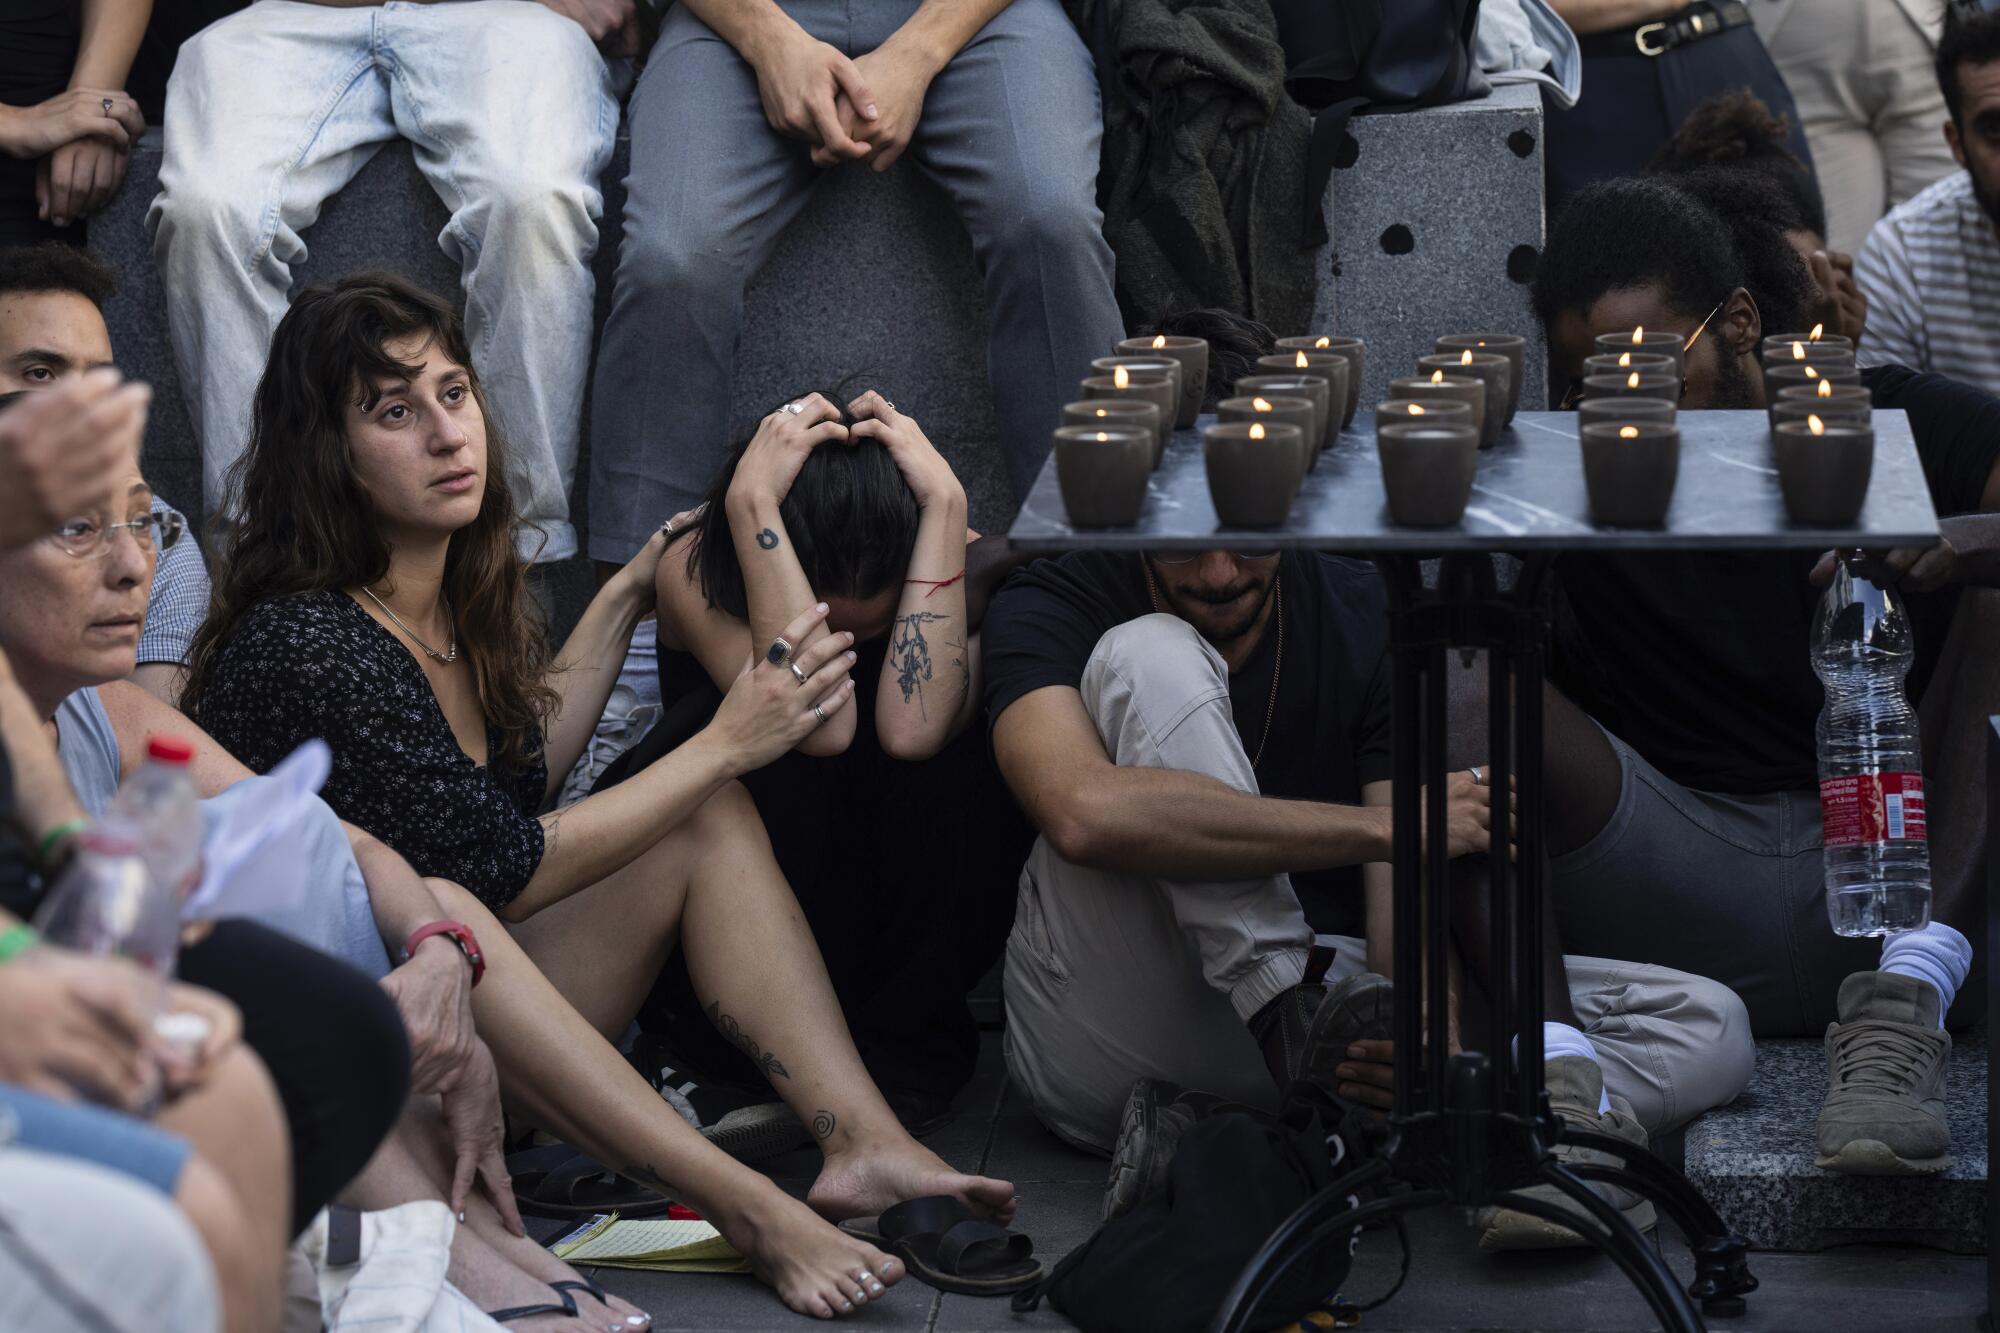 Mourners sit near a table with lighted candles at a funeral of an Israeli man killed by Hamas militants.